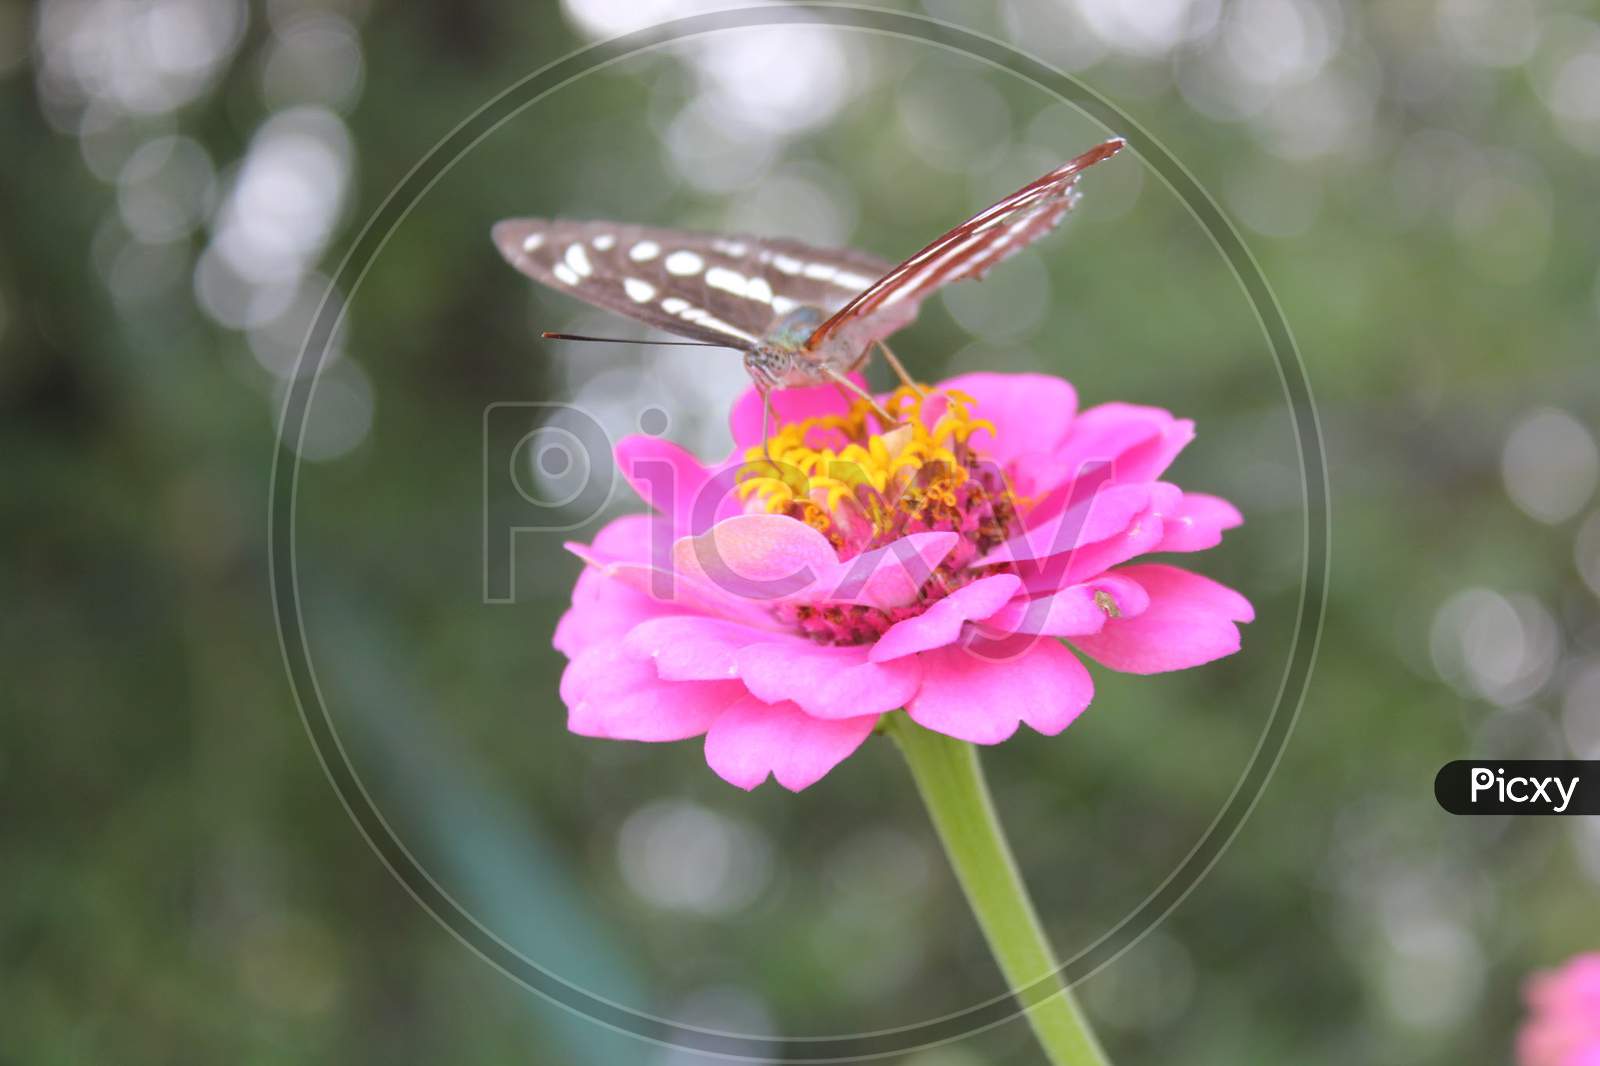 Butterfly and pink flower